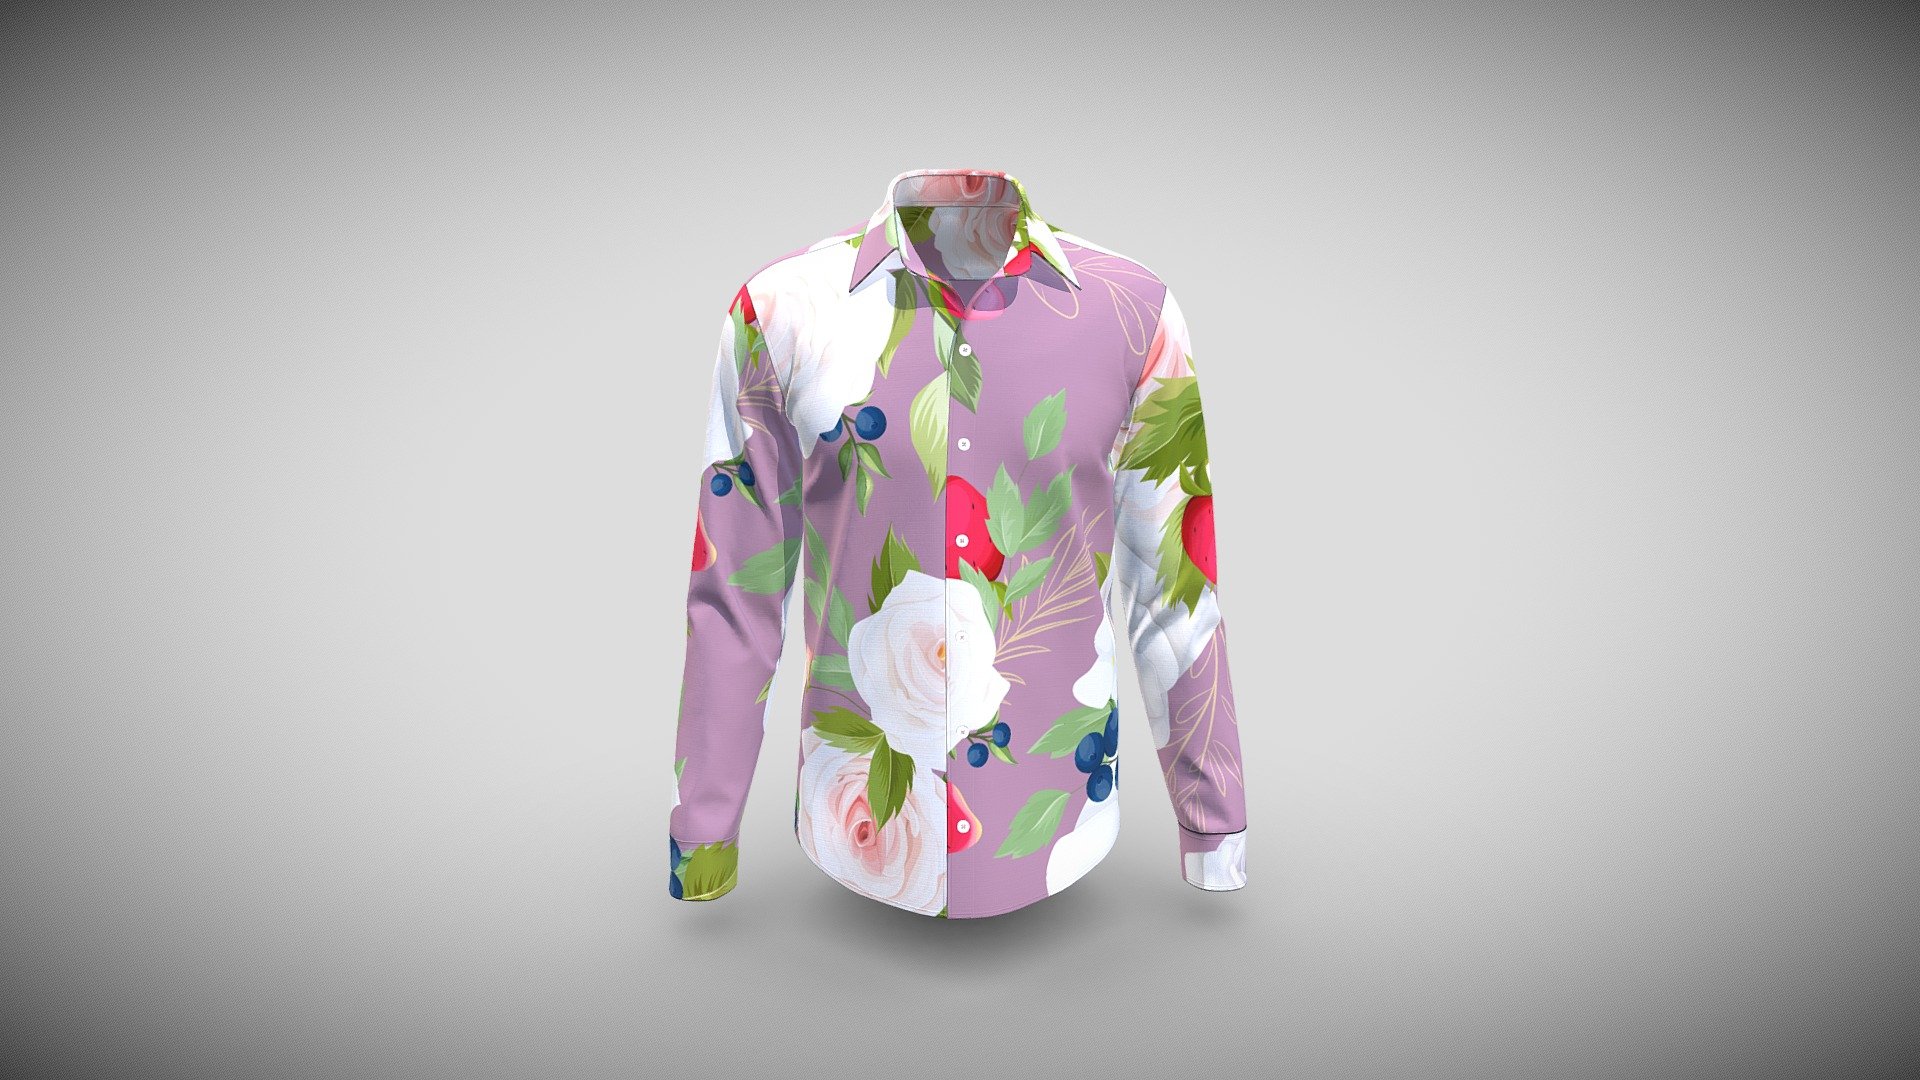 Cloth Title = Men's Basic Slim Fit Casual Shirt OBJ 

SKU = DG100057
 
Product Type = Shirt 

Cloth Length = Regular 

Body Fit = Slim Fit 

Occasion = Casual  

Sleeve Style = Set In Sleeve 


Our Services:

3D Apparel Design.

OBJ,FBX,GLTF Making with High/Low Poly.

Fabric Digitalization.

Mockup making.

3D Teck Pack.

Pattern Making.

2D Illustration.

Cloth Animation and 360 Spin Video.


Contact us:- 

Email: info@digitalfashionwear.com 

Website: https://digitalfashionwear.com 

WhatsApp No: +8801759350445 


We designed all the types of cloth specially focused on product visualization, e-commerce, fitting, and production. 

We will design: 

T-shirts 

Polo shirts 

Hoodies 

Sweatshirt 

Jackets 

Shirts 

TankTops 

Trousers 

Bras 

Underwear 

Blazer 

Aprons 

Leggings 

and All Fashion items. 





Our goal is to make sure what we provide you, meets your demand 3d model